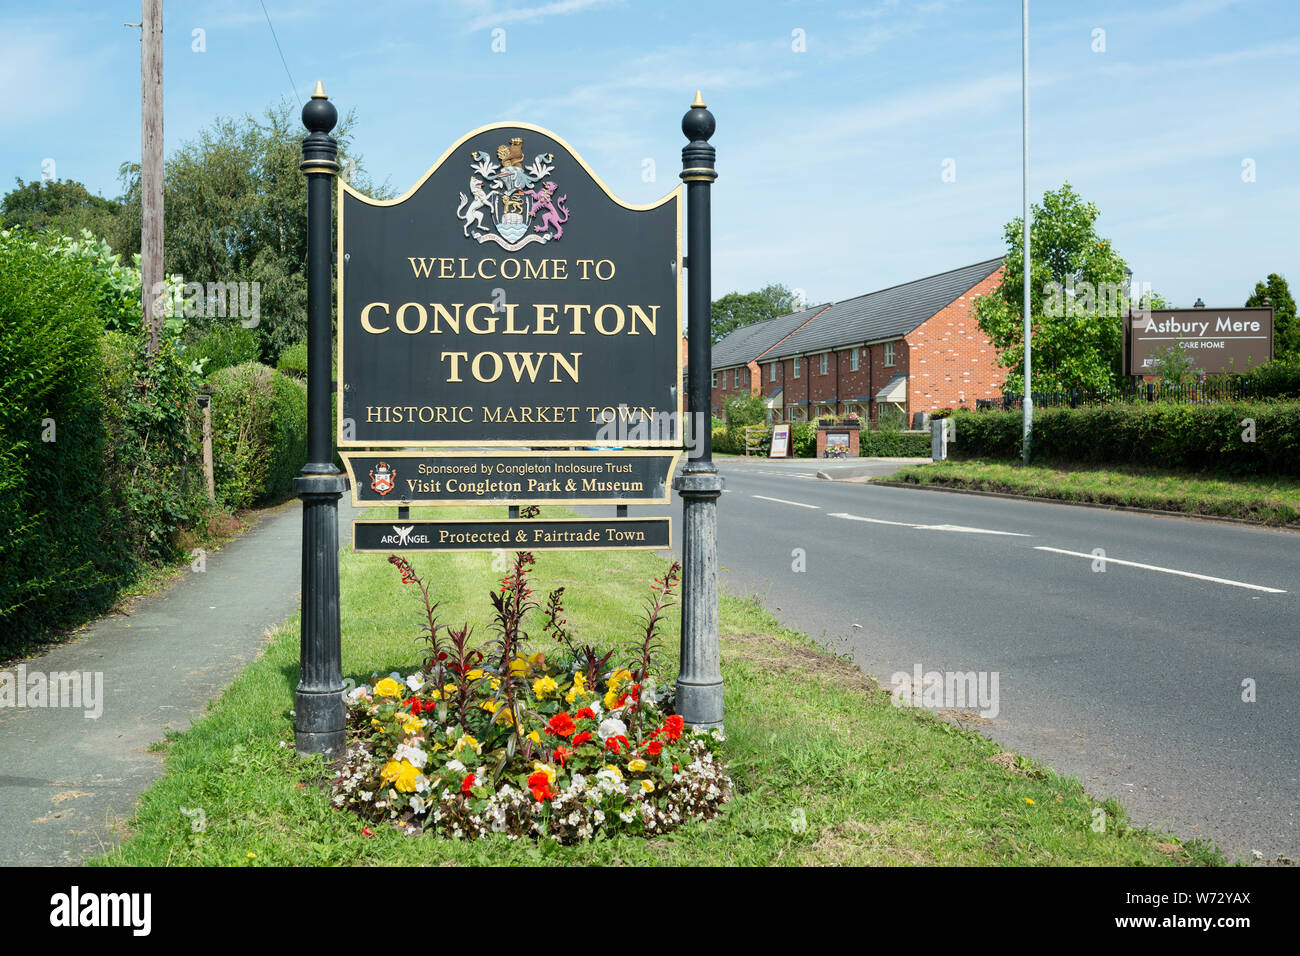 Signage welcoming people to the town of Congleton, Cheshire, UK. Stock Photo